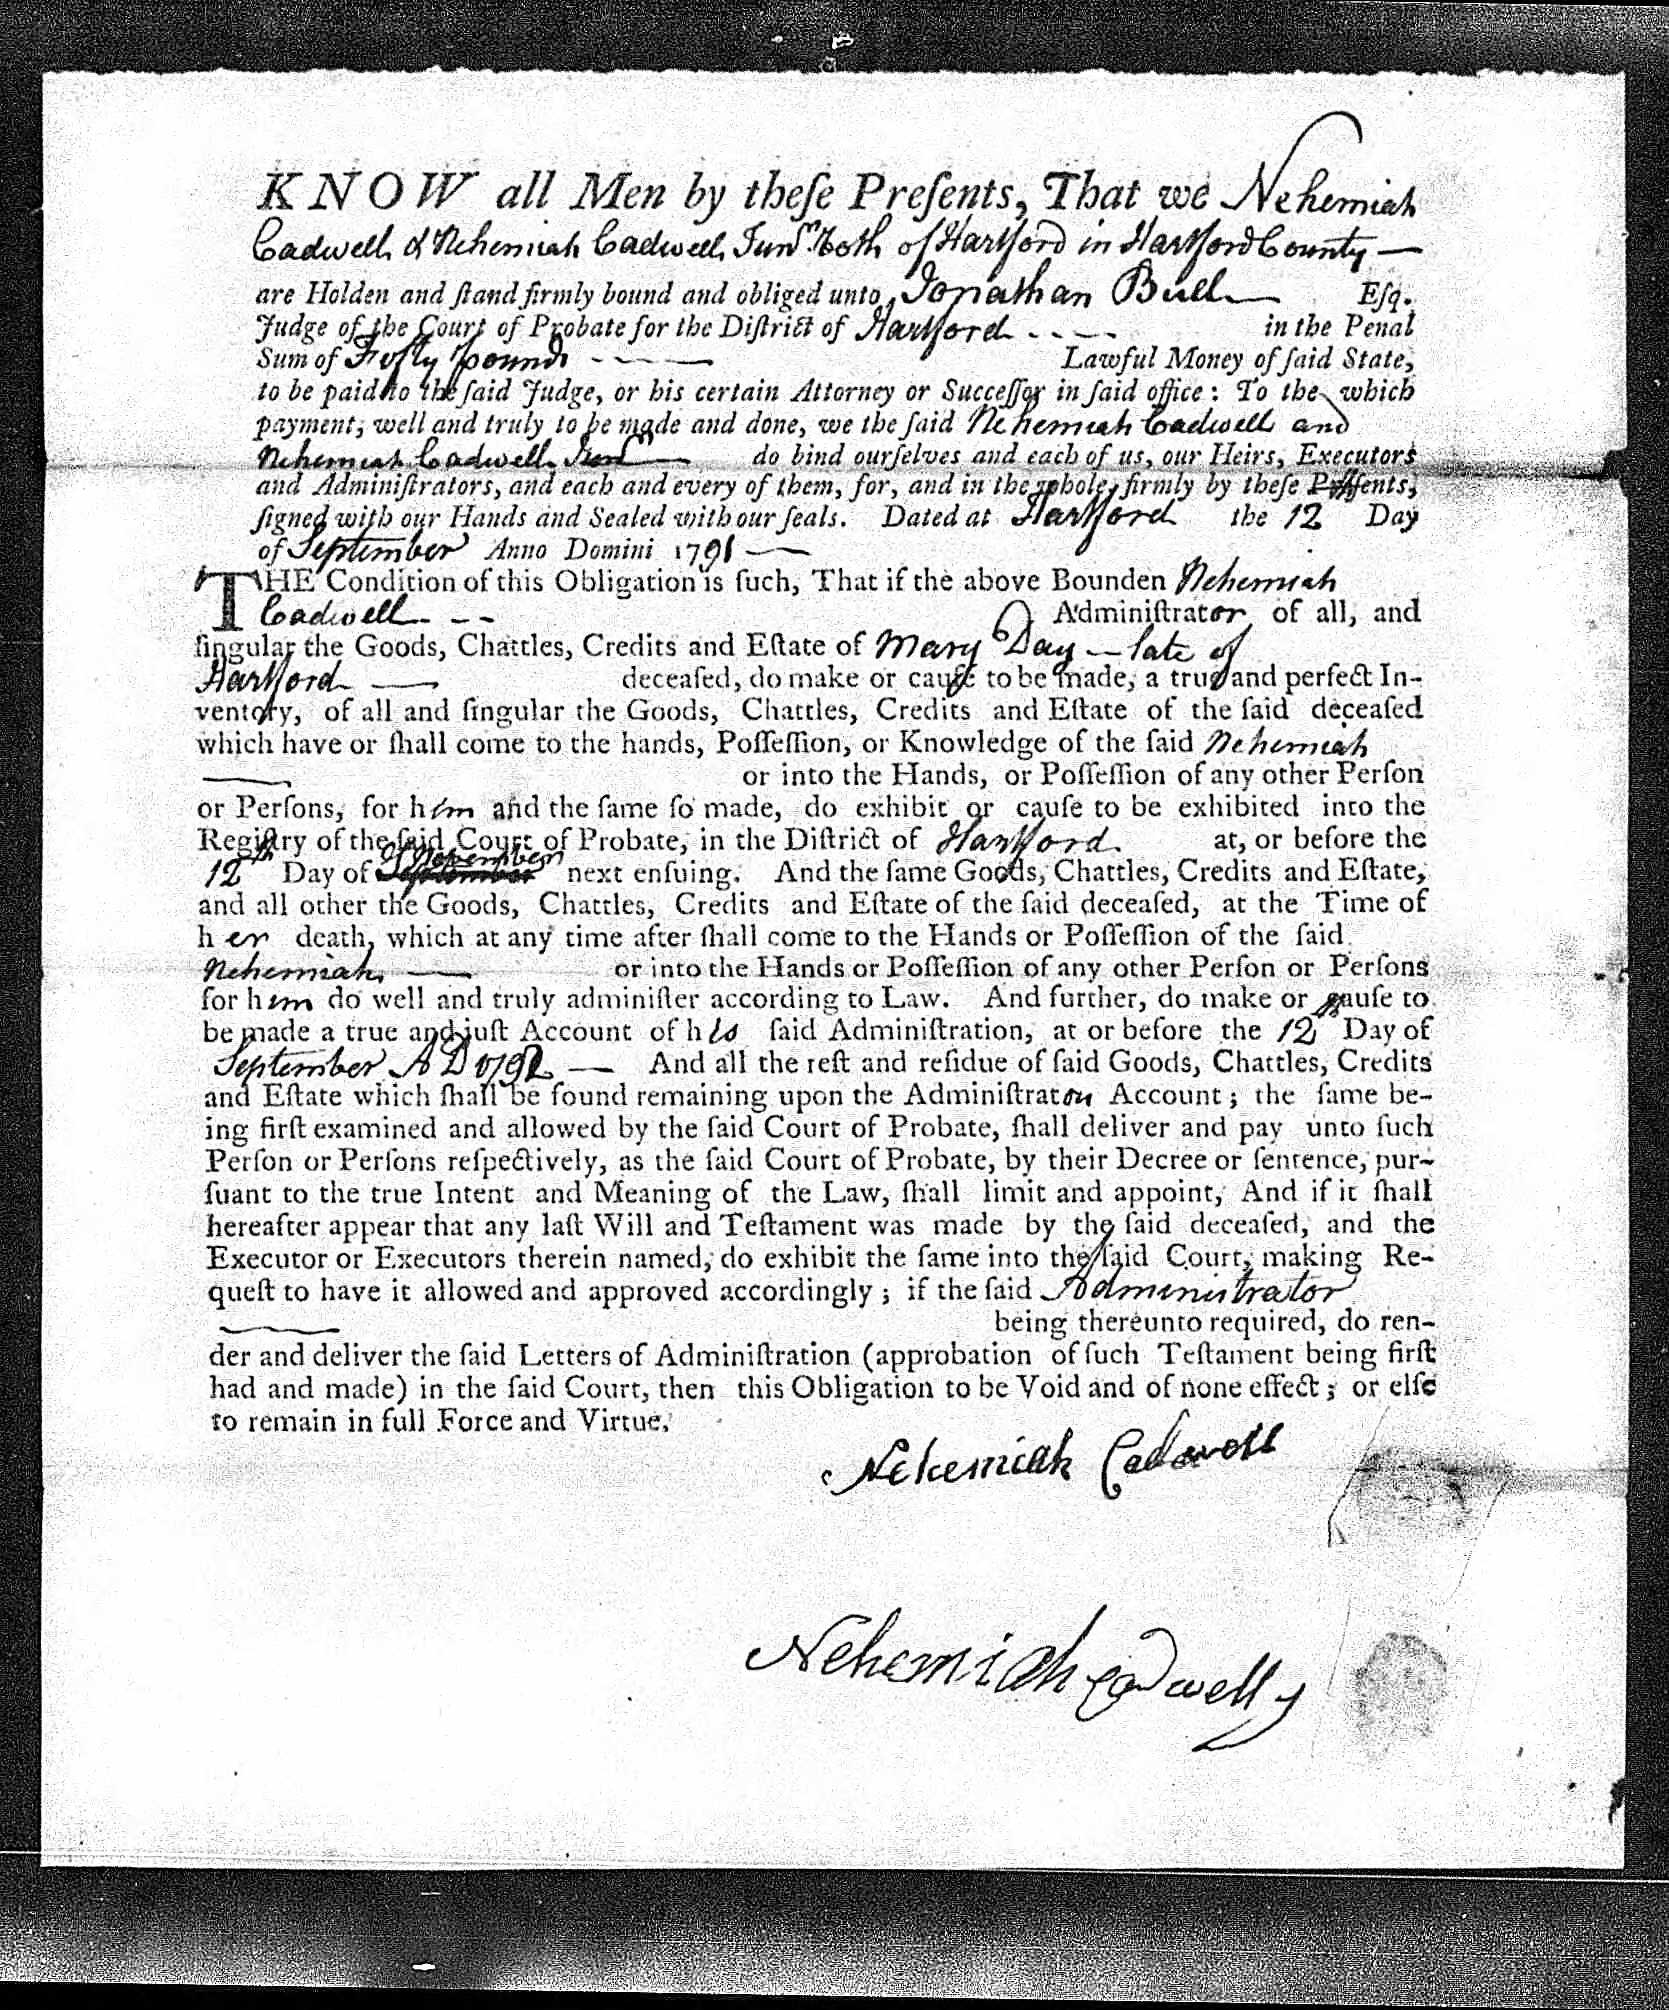 Page 1 of Mary (Butler) Day's probate